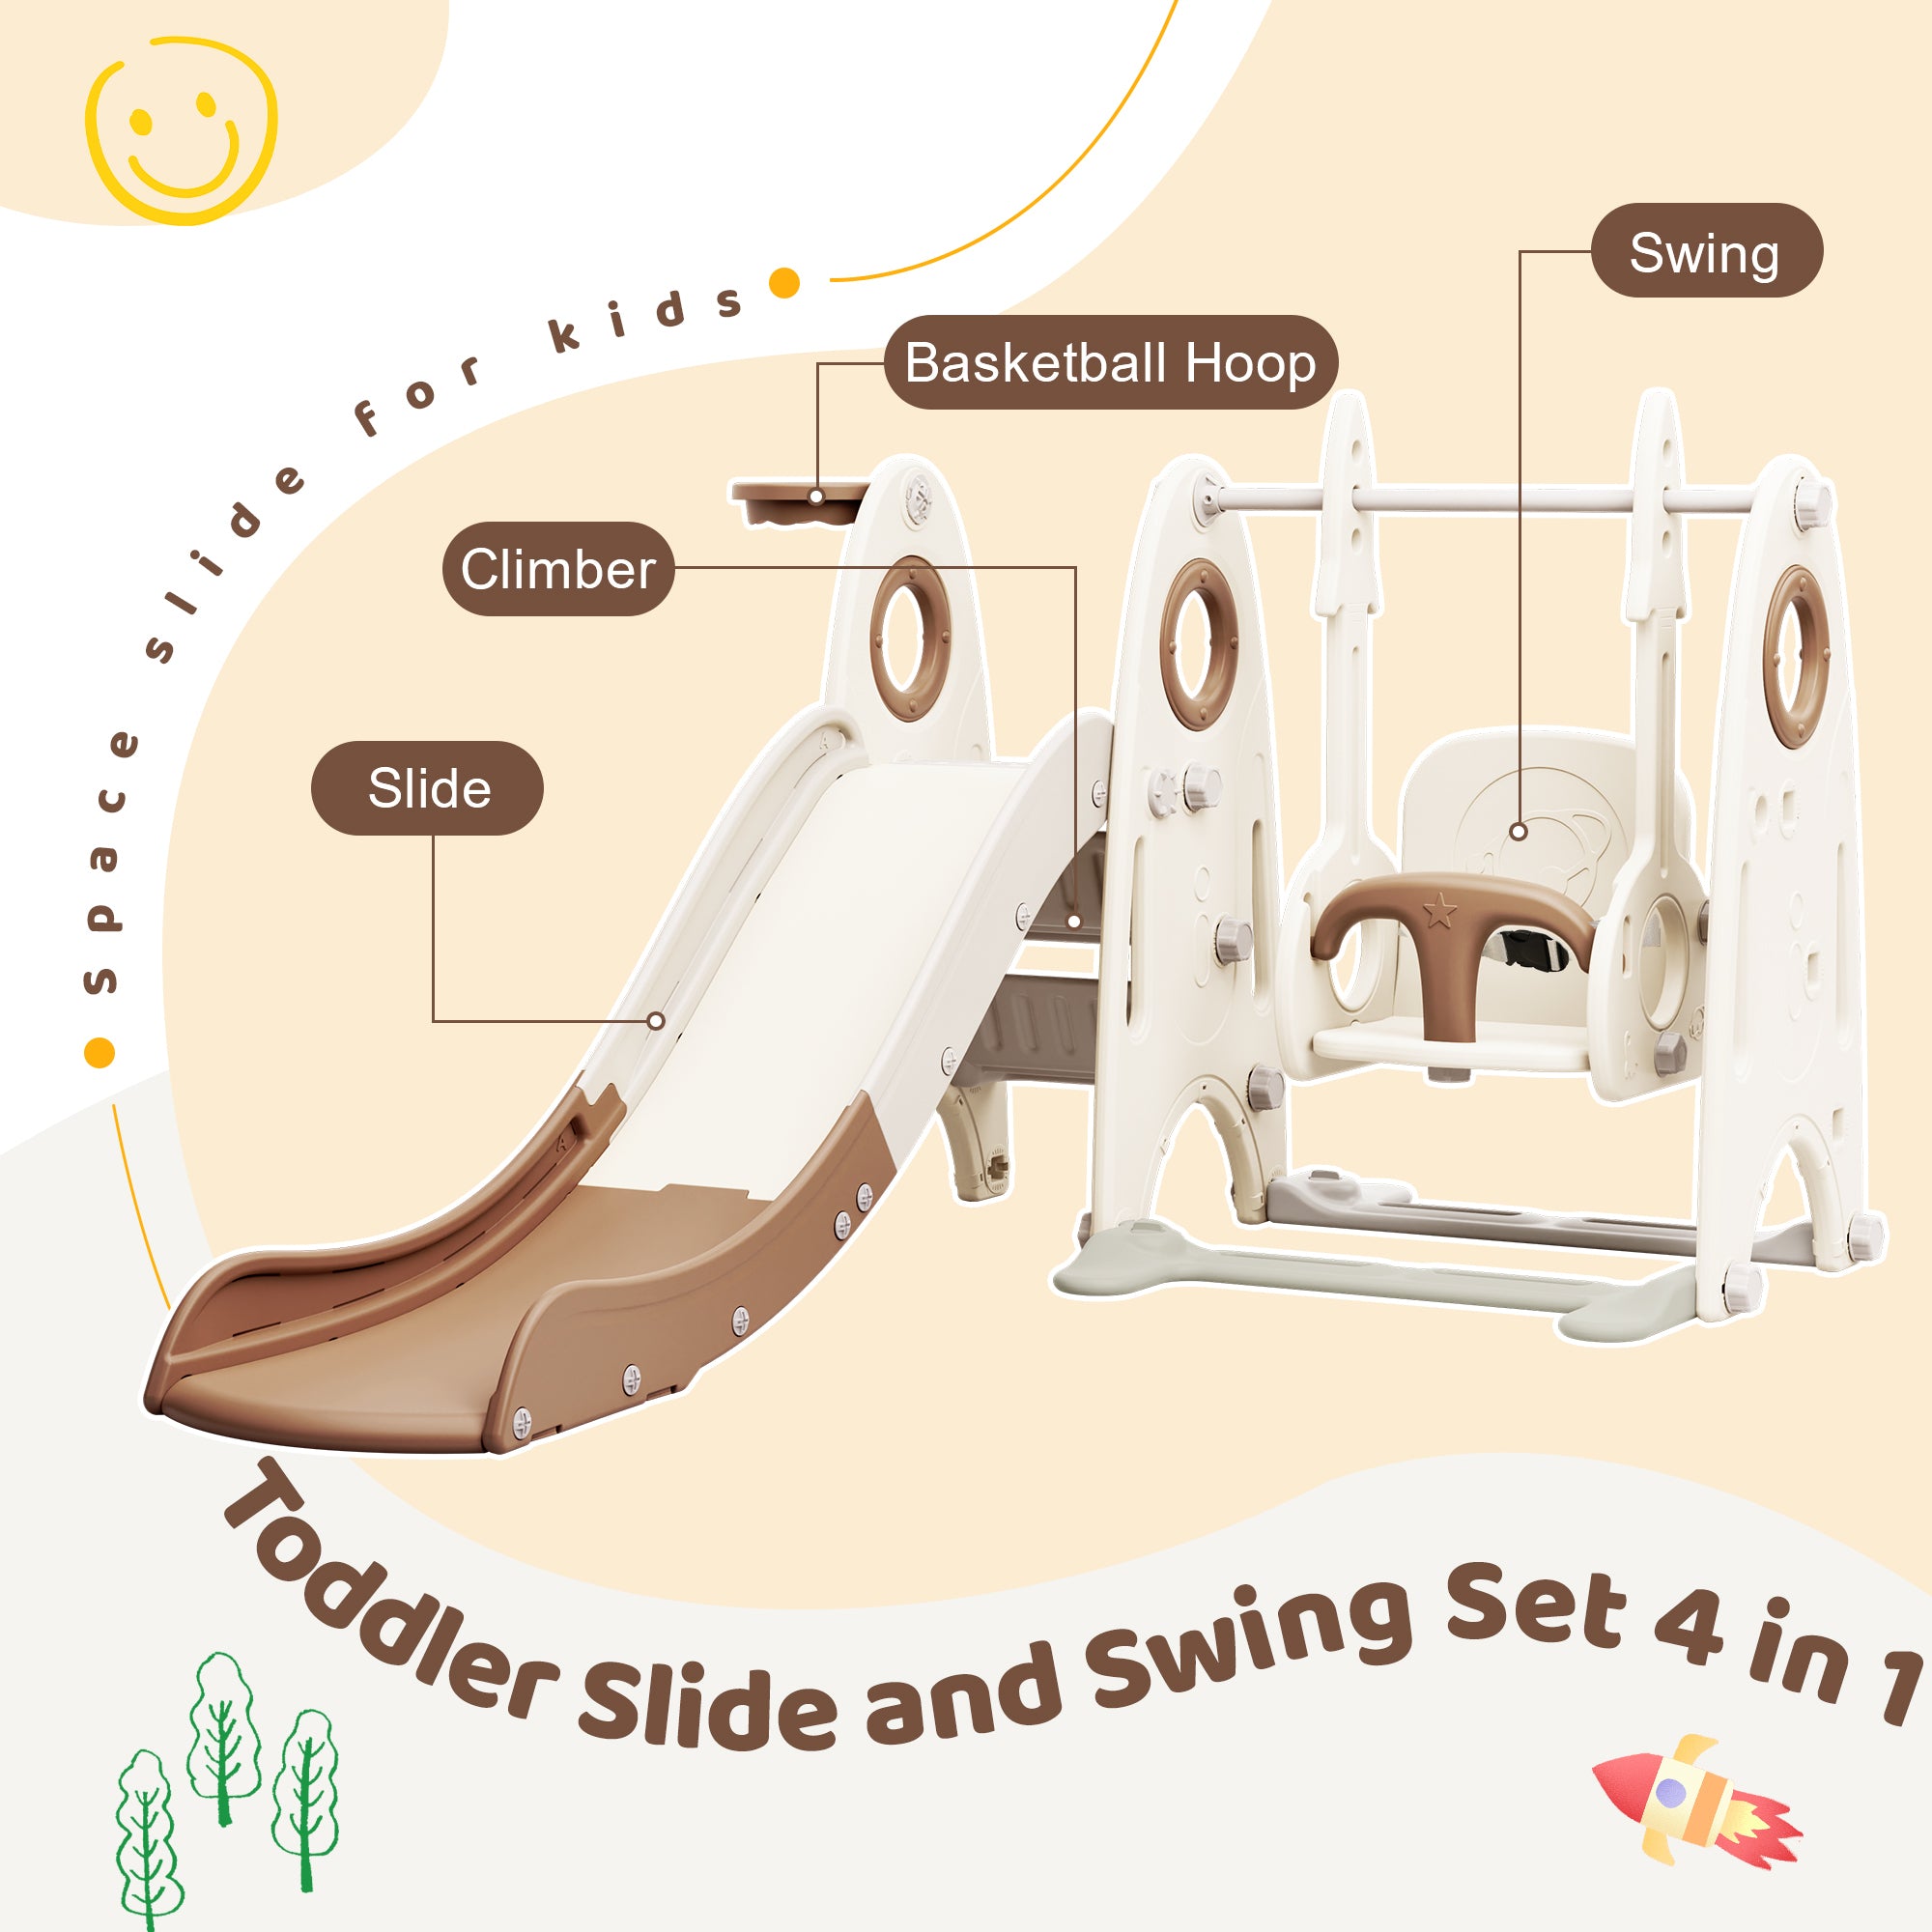 4 in 1 Toddler Slide and Swing Set, Kids Playground Climber Slide Playset with Basketball Hoop,Freestanding Combination for babies